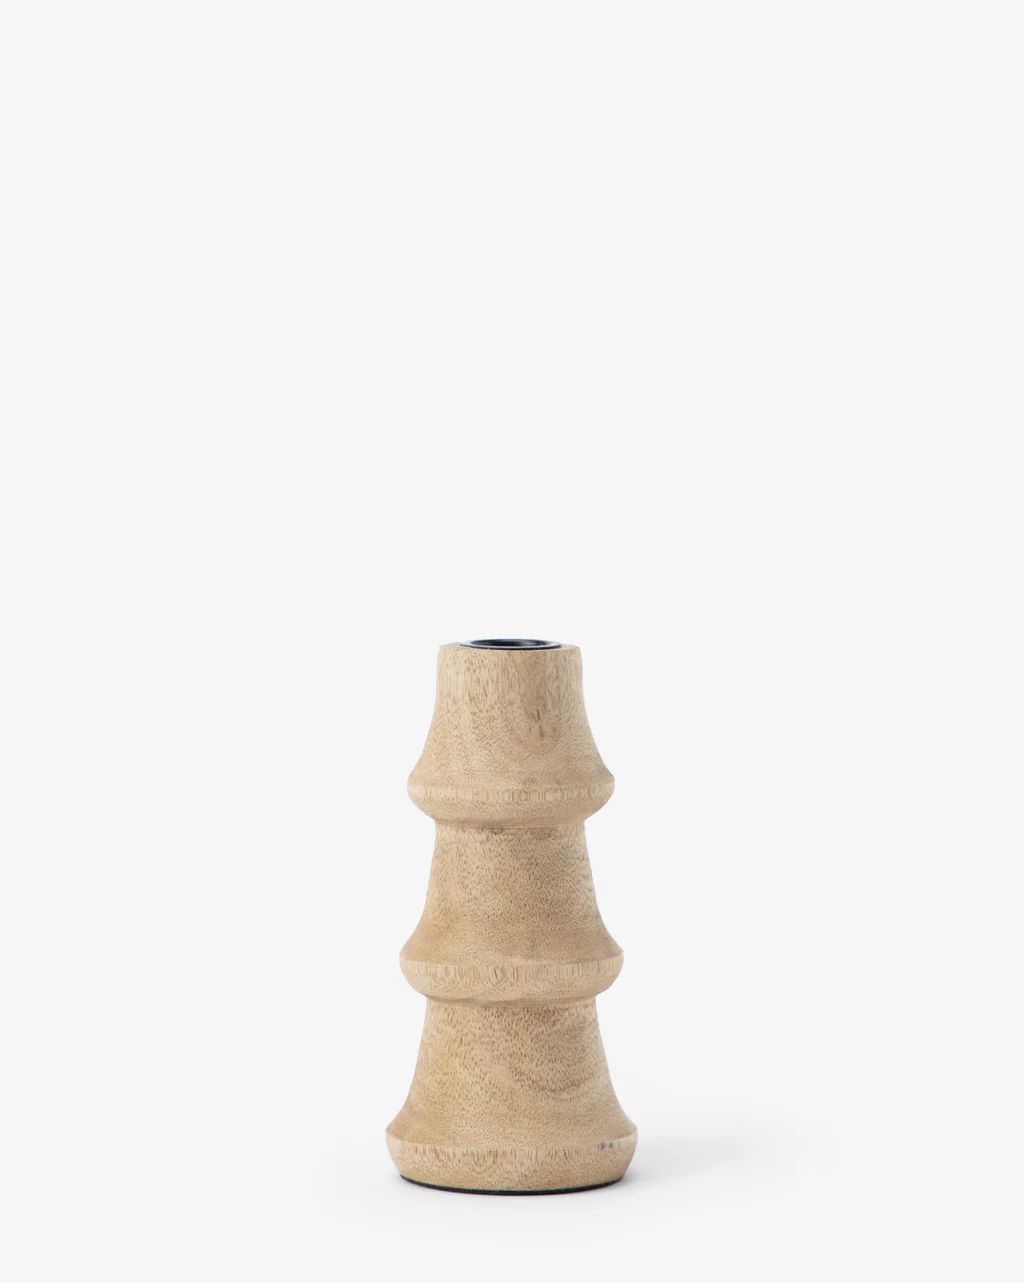 Carved Wood Taper Holder | McGee & Co.